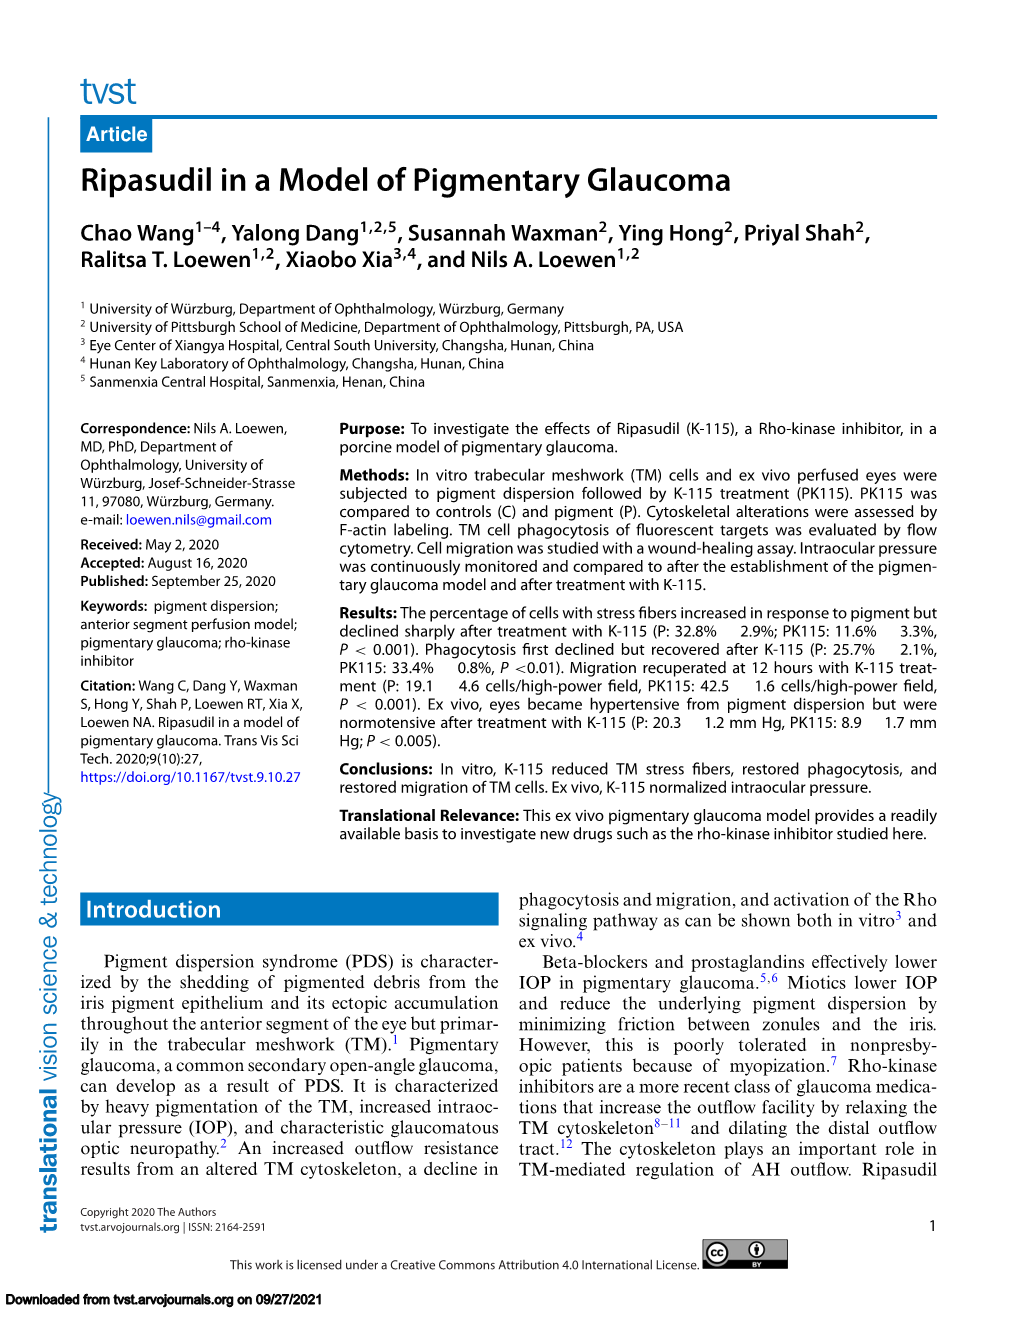 Ripasudil in a Model of Pigmentary Glaucoma